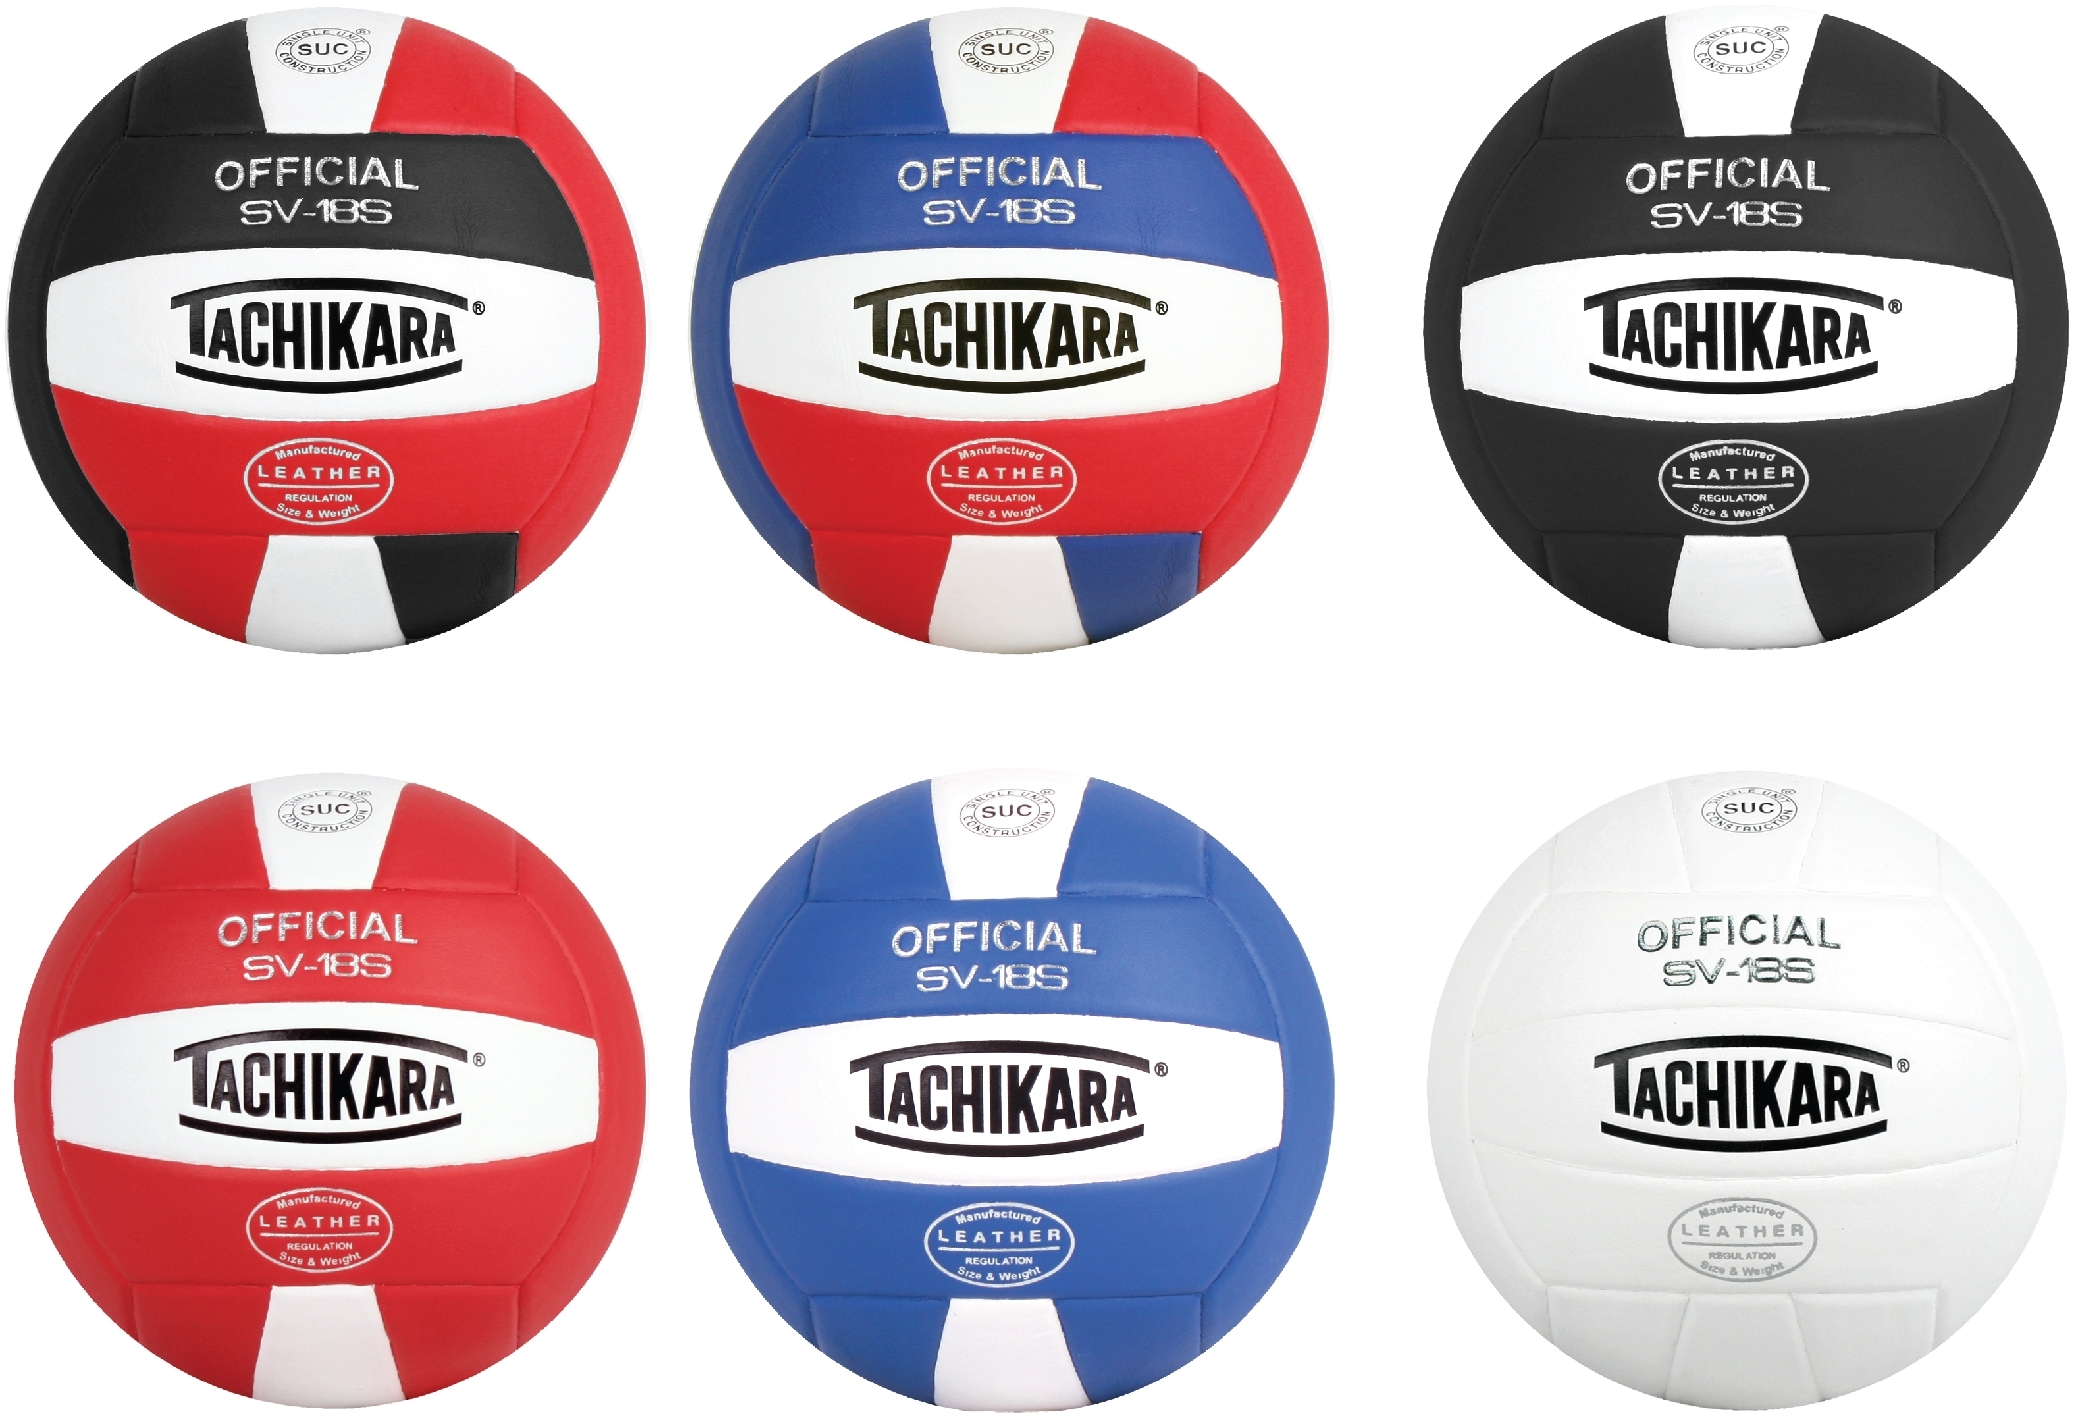 Royal-White Tachikara Institutional Quality Composite Leather Volleyball Renewed 